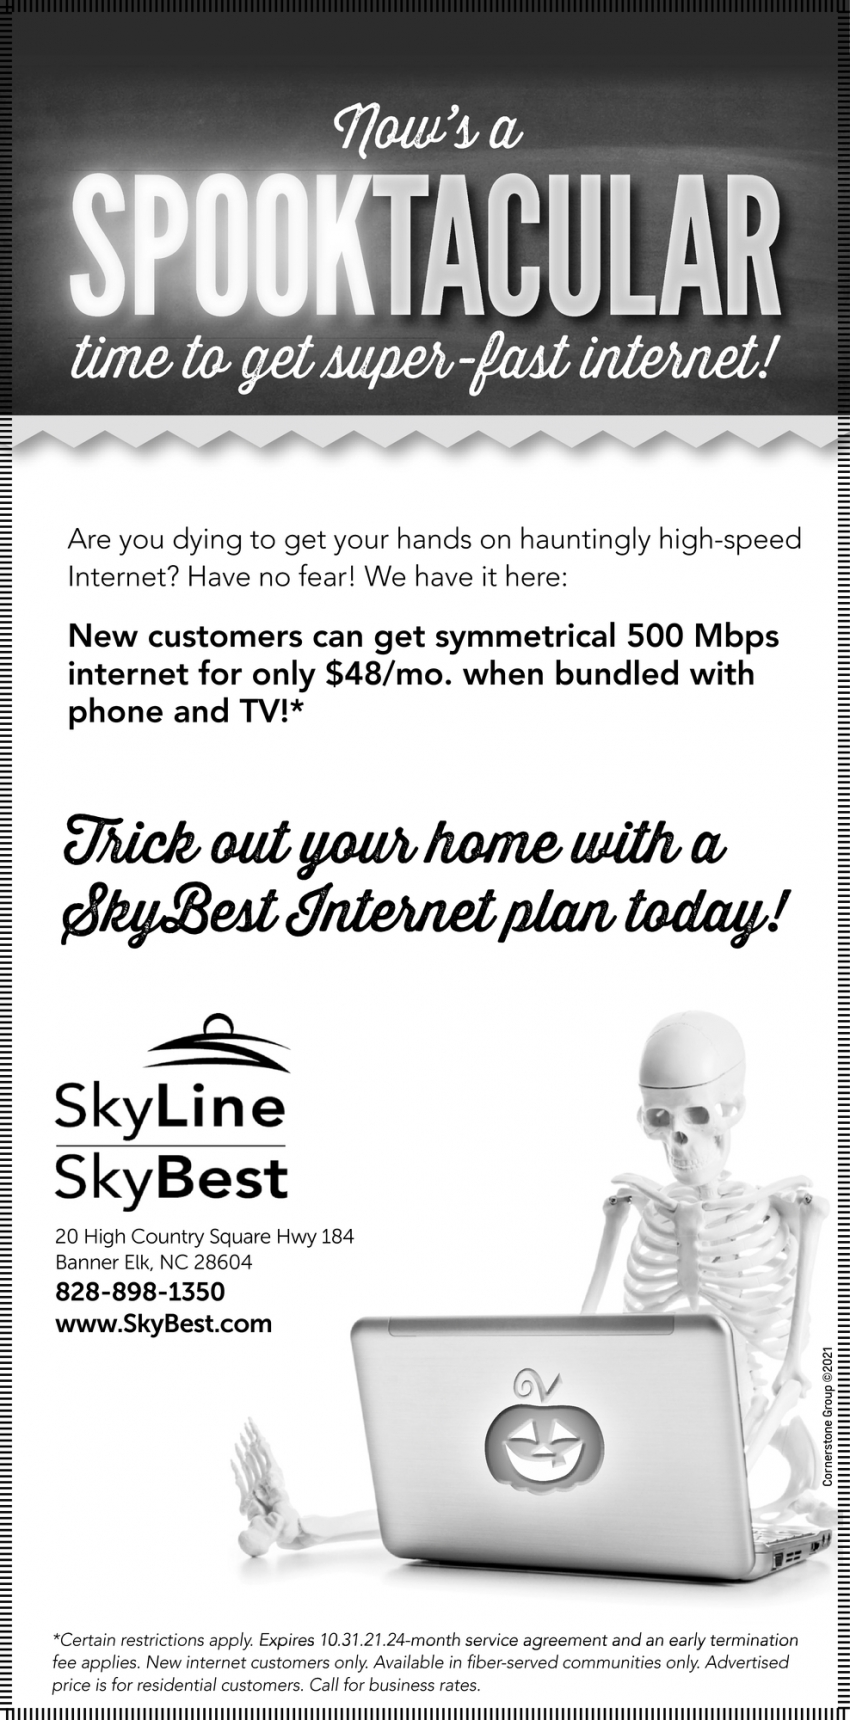 Now's a Spooktacular Time To Get Super-Fast Internet!